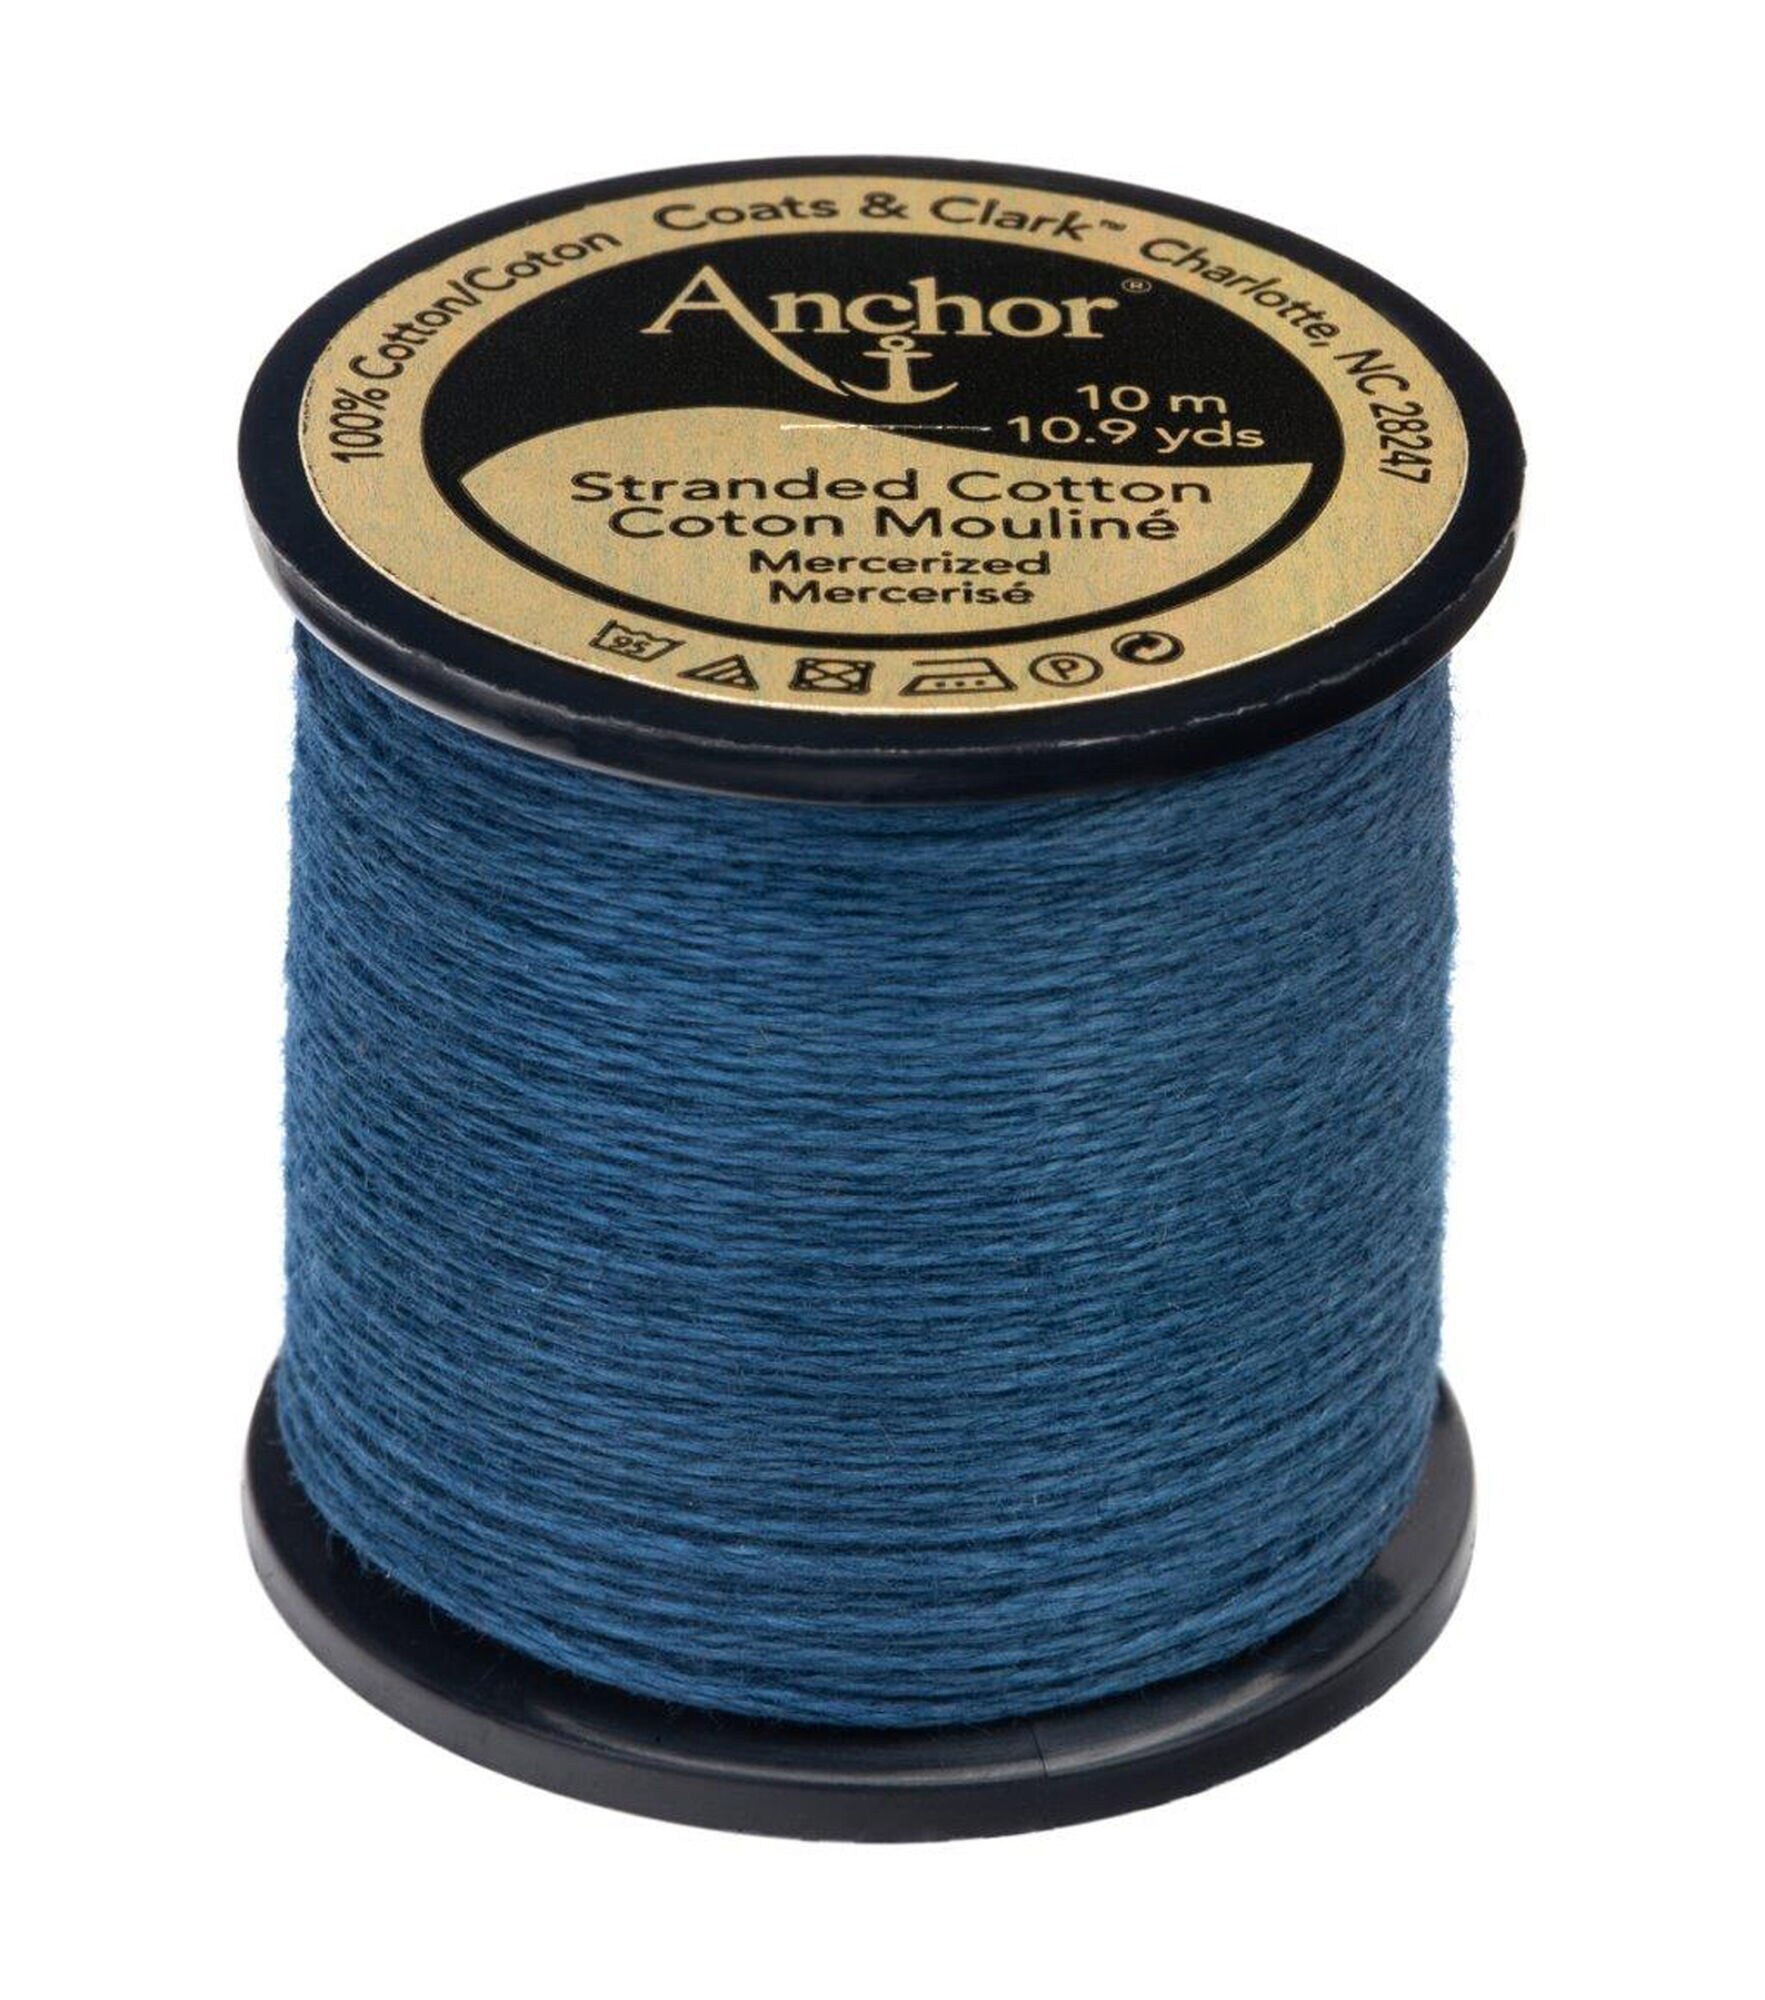 Anchor Cotton 10.9yd Blues Cotton Embroidery Floss, 1036 Antique Blue Very Dark, hi-res